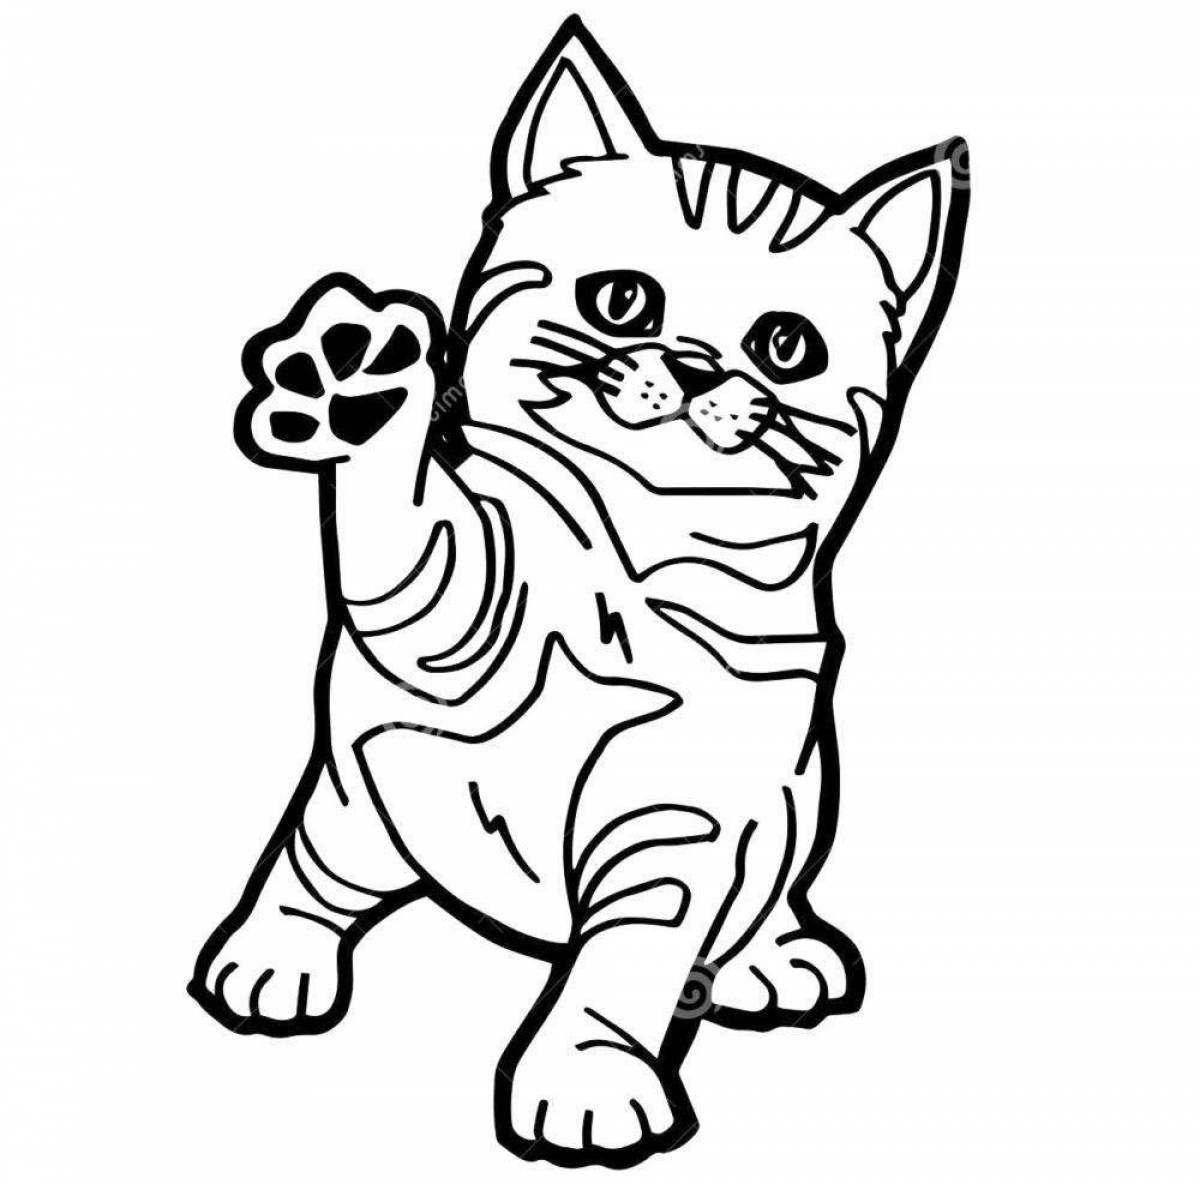 Cute Chinese cat coloring page